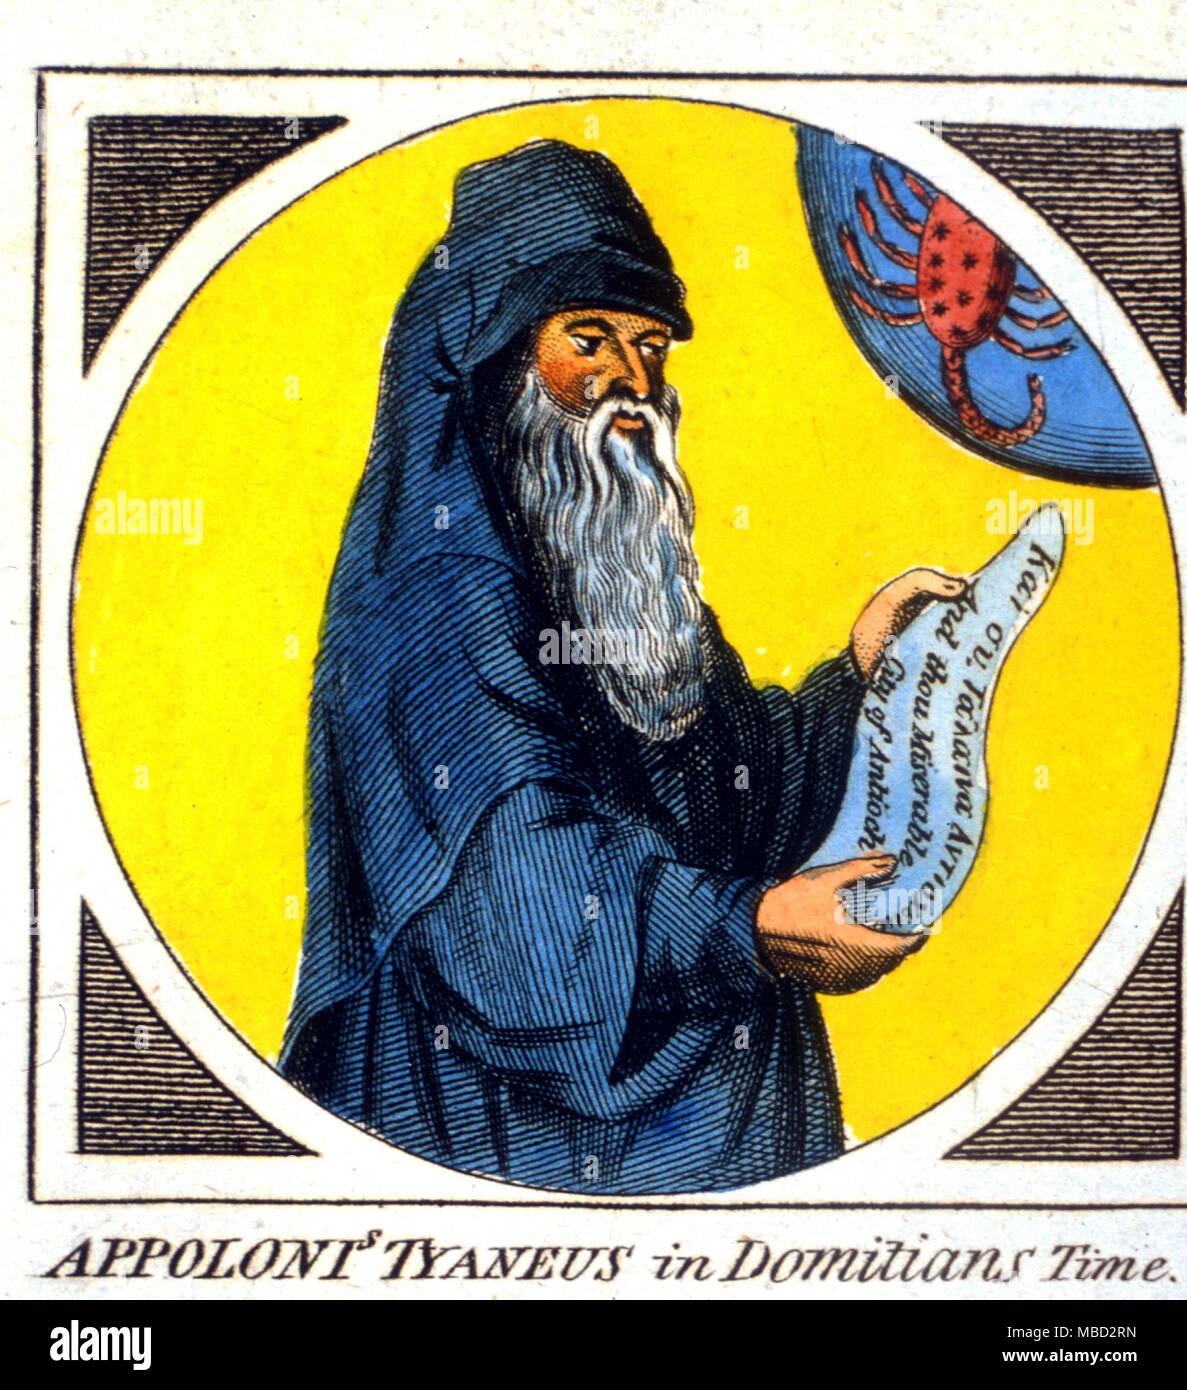 Occultists - Appolonius of Tyana - an approximate contemporary of Jesus Christ. In his day, a famous occultist, clairvoyant and teacher of mystery wisdom. From the 1790 engraving in Sibly's Illustration of the Occult Arts. - © / CW Stock Photo